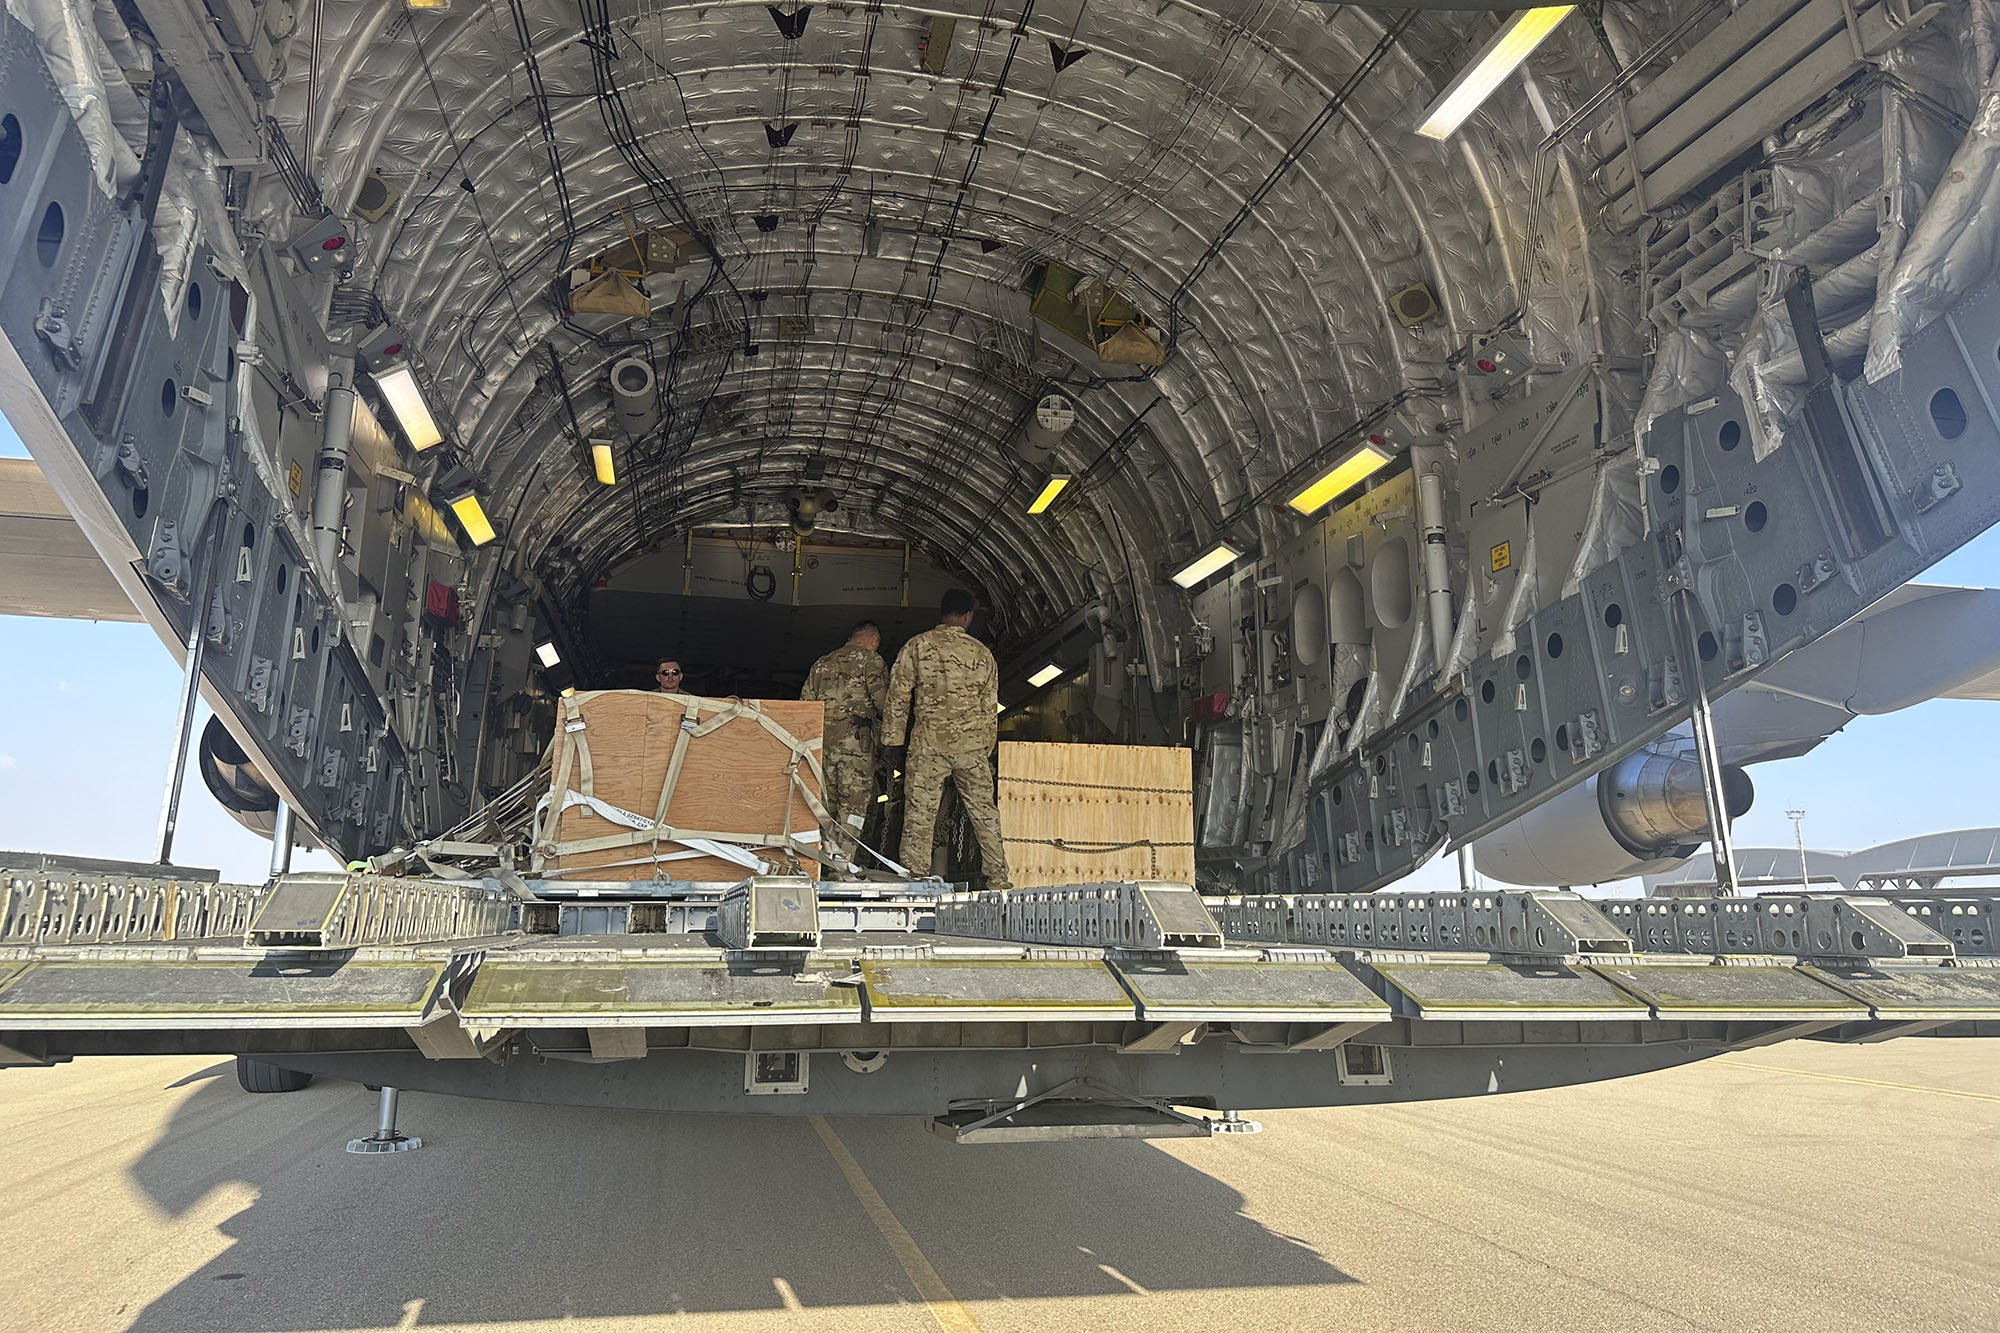 A U.S. C-17 sits at the Nevatim Air Base in the desert in Israel, on October 13. The aircraft arrived with crates of American munitions for Israel. 